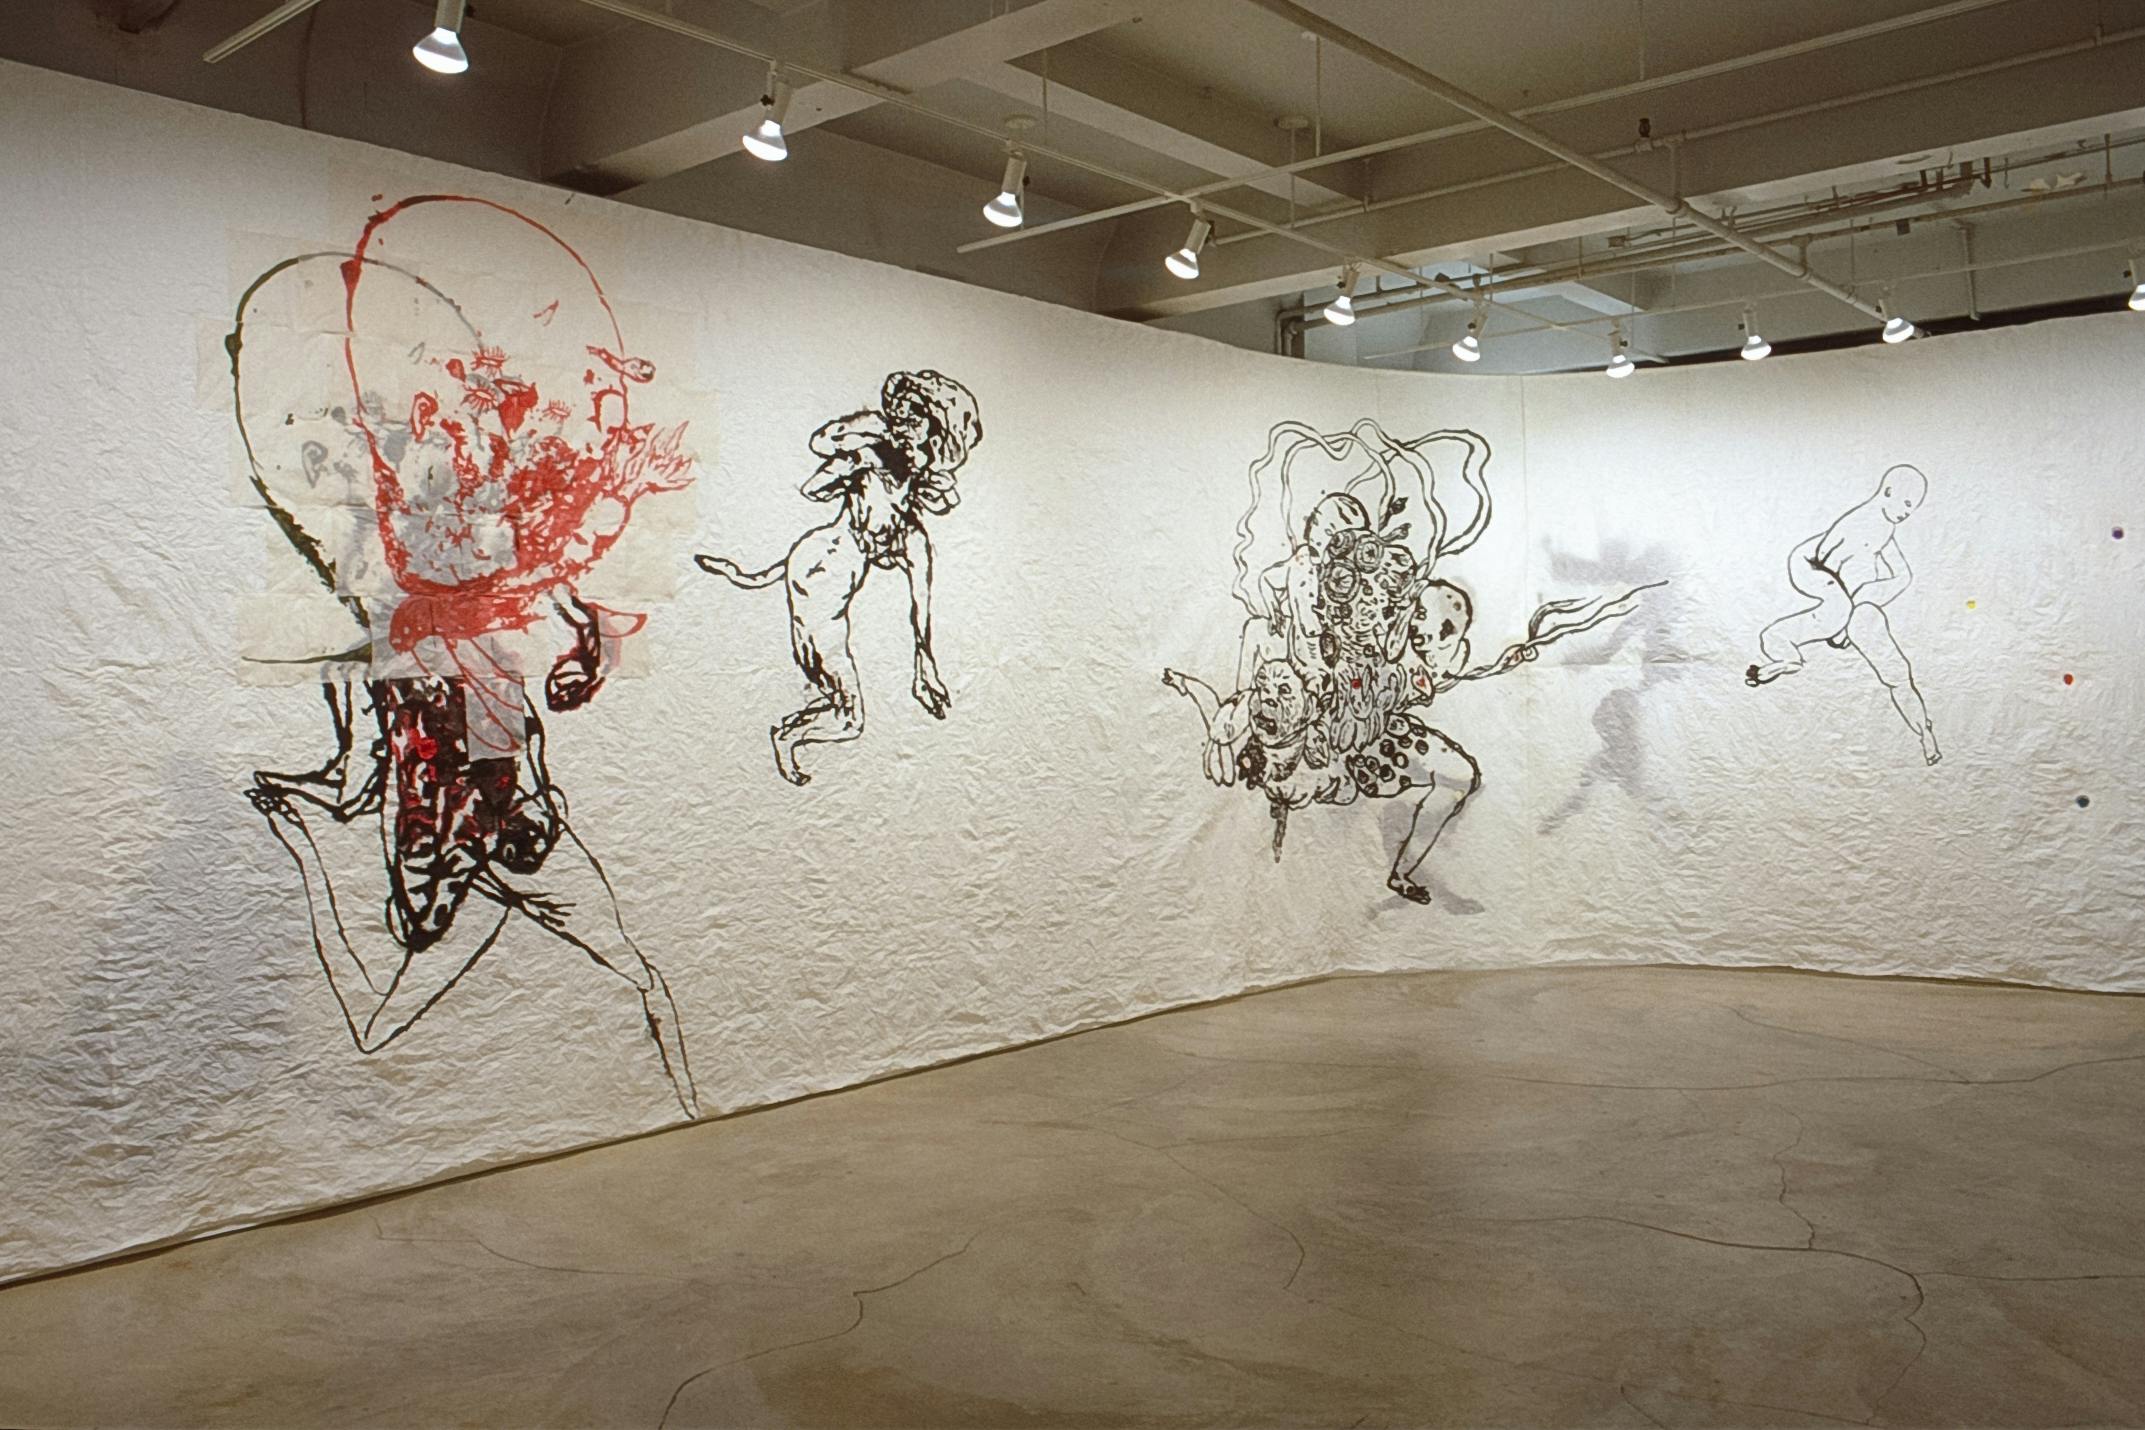 Gallery walls are covered by a wide white scroll of paper, on which Ed Pien’s drawings are made. One of the drawn figures has an inflamed huge head in red over the naked body outlined in black. 